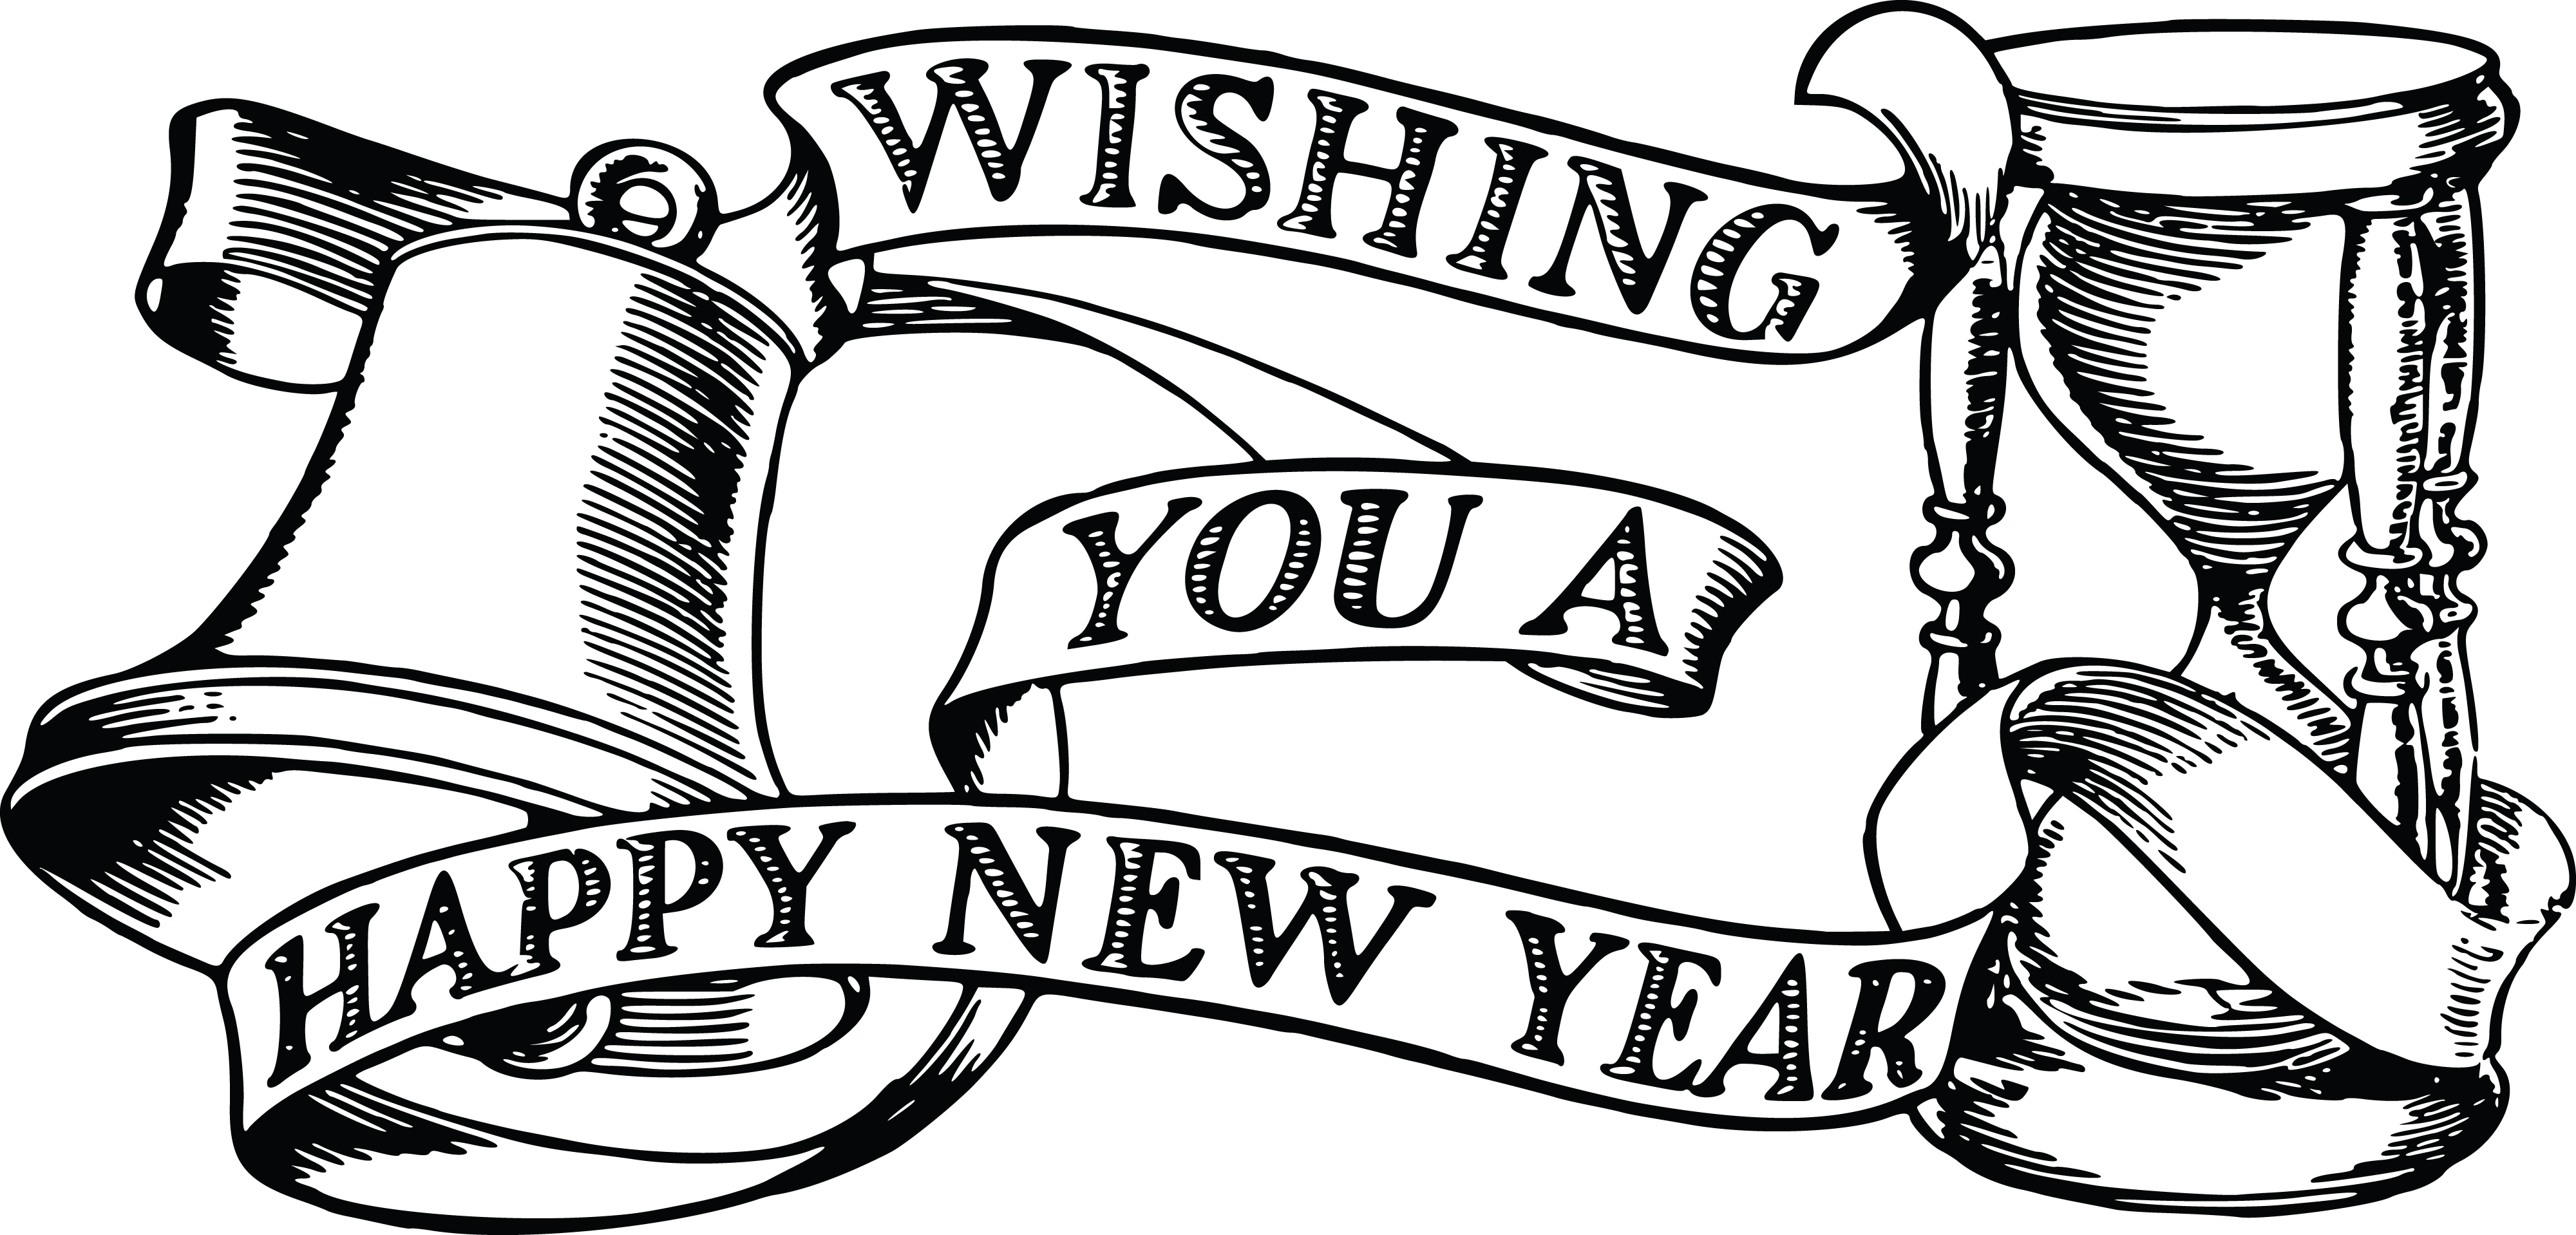 New Years Eve Clipart Black And White.